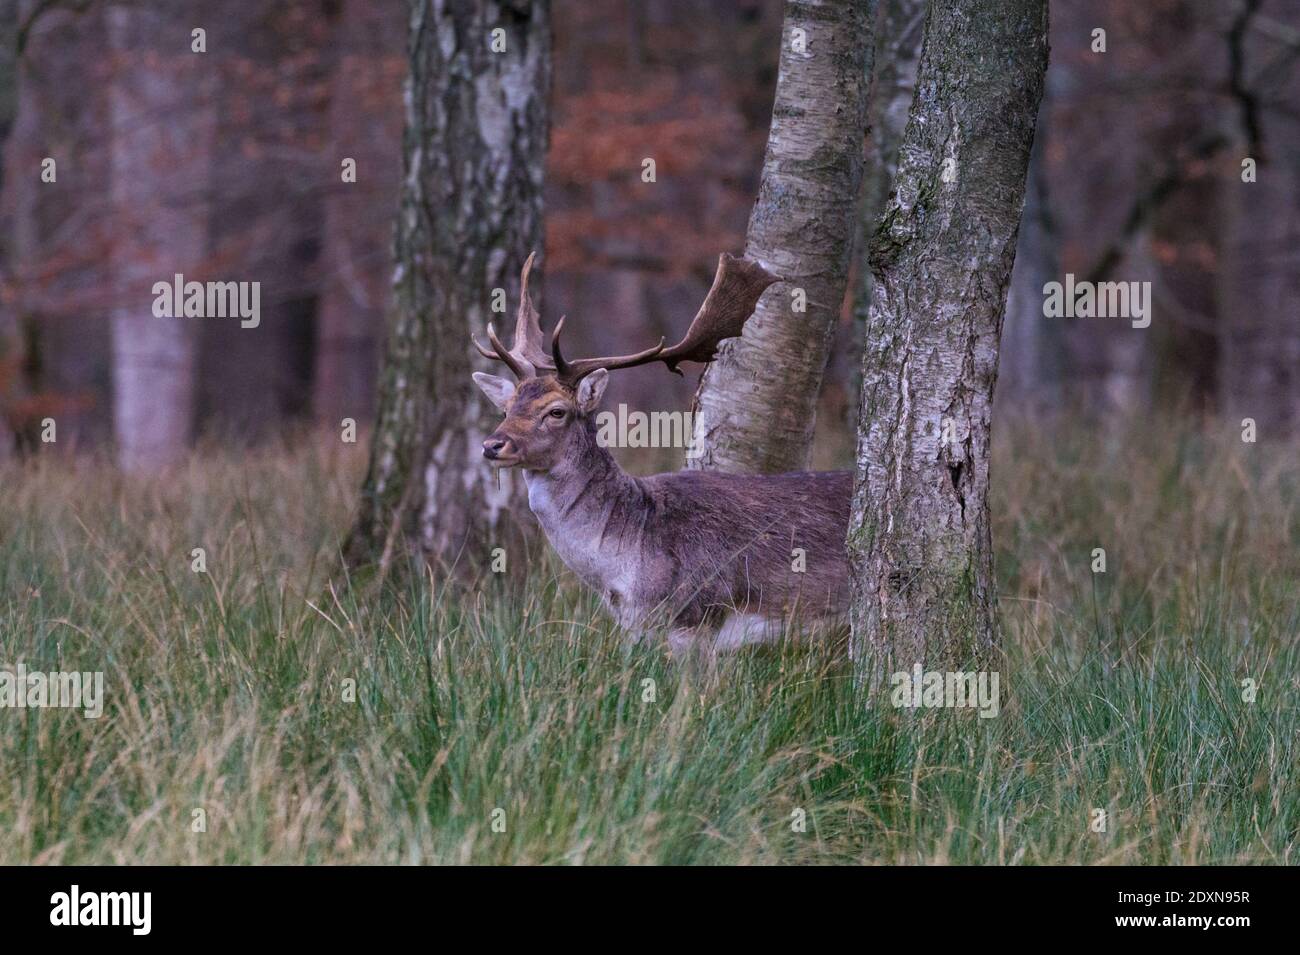 Fallow deer (dama dama) male (bucks) stands in grass and woodland, Germany Stock Photo